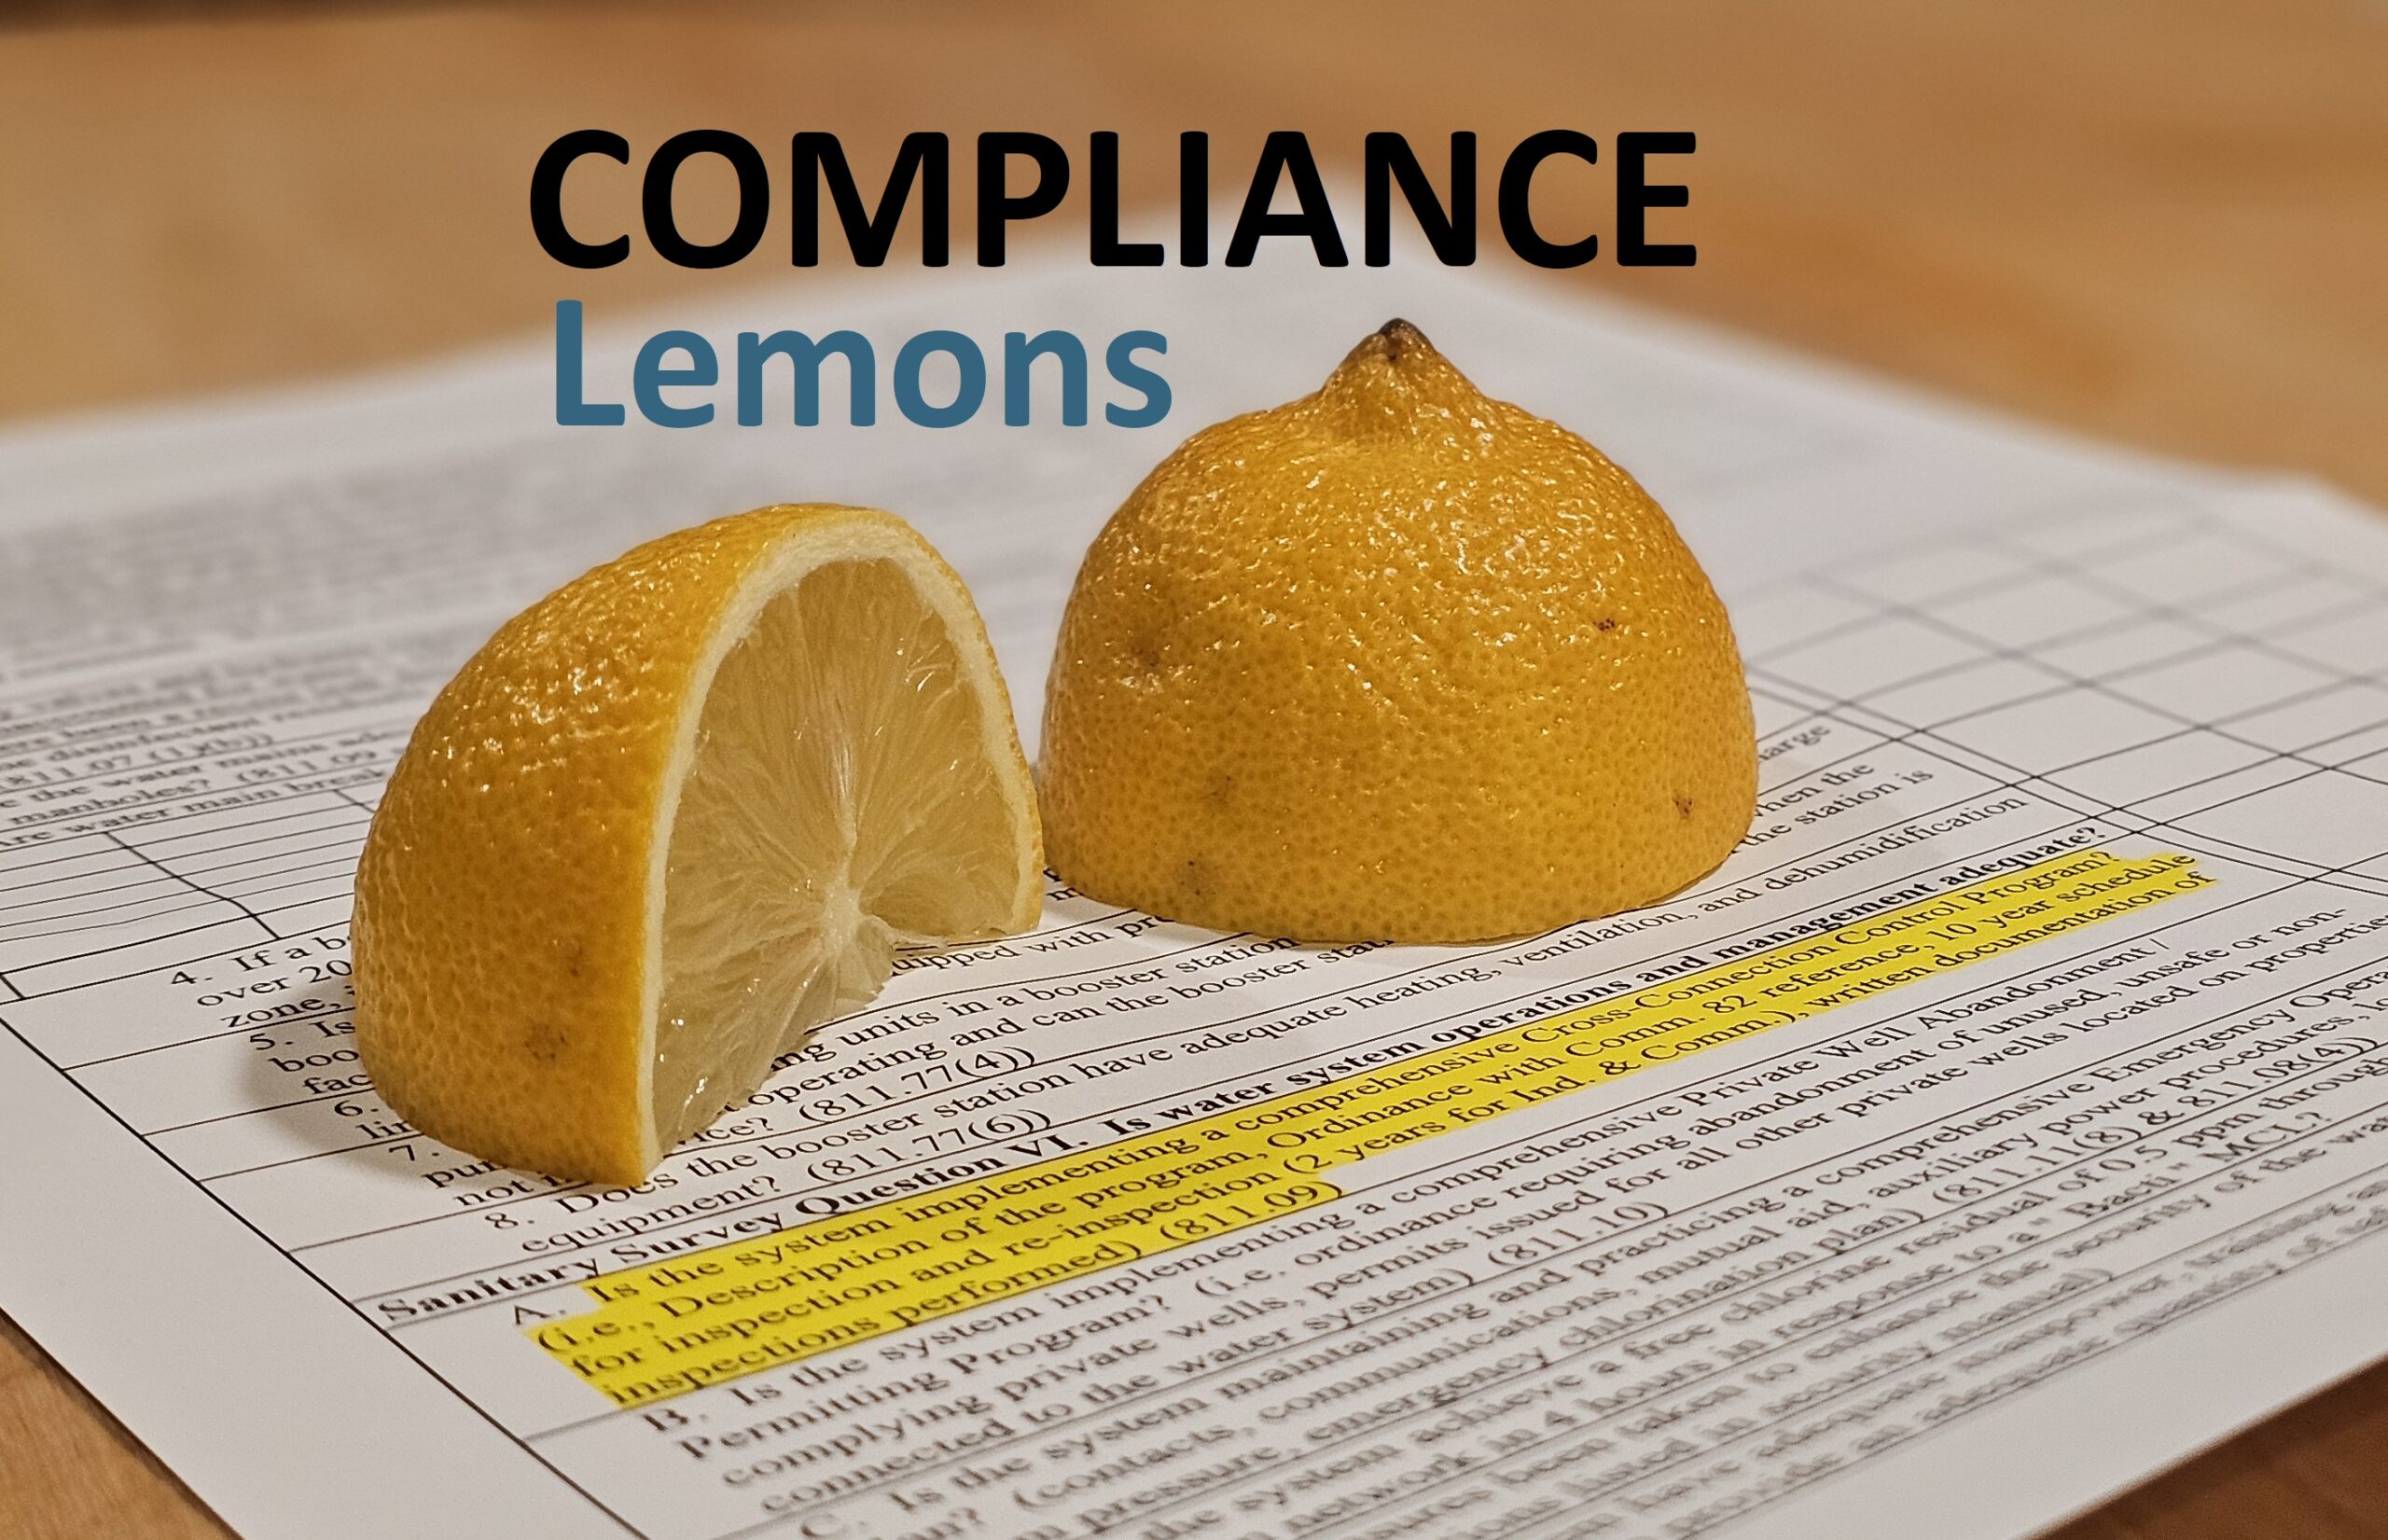 Backflow and Cross-Connection Compliance Lemons